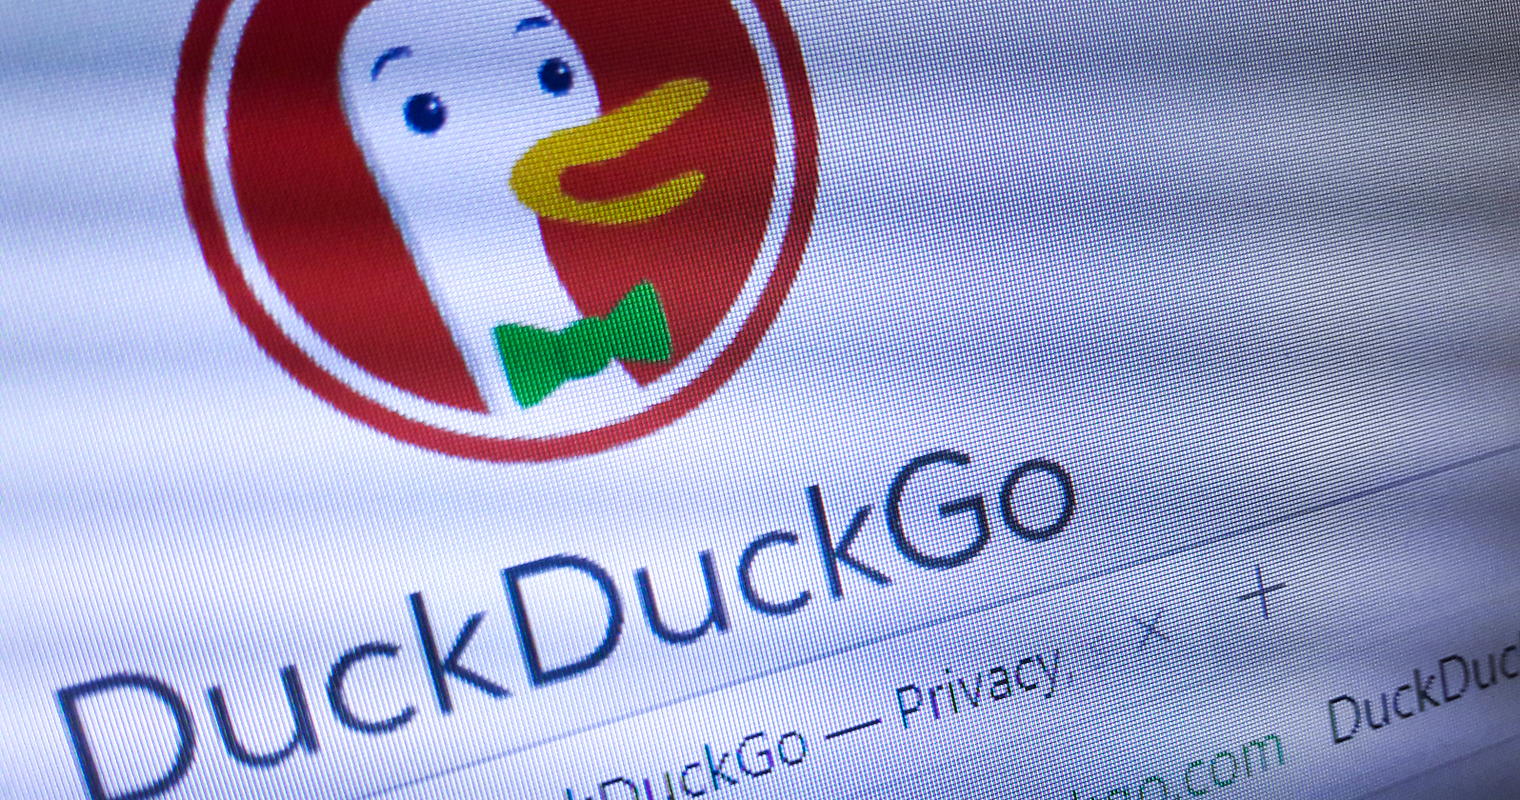 Google Adds DuckDuckGo As a Search Option in Chrome for the First Time